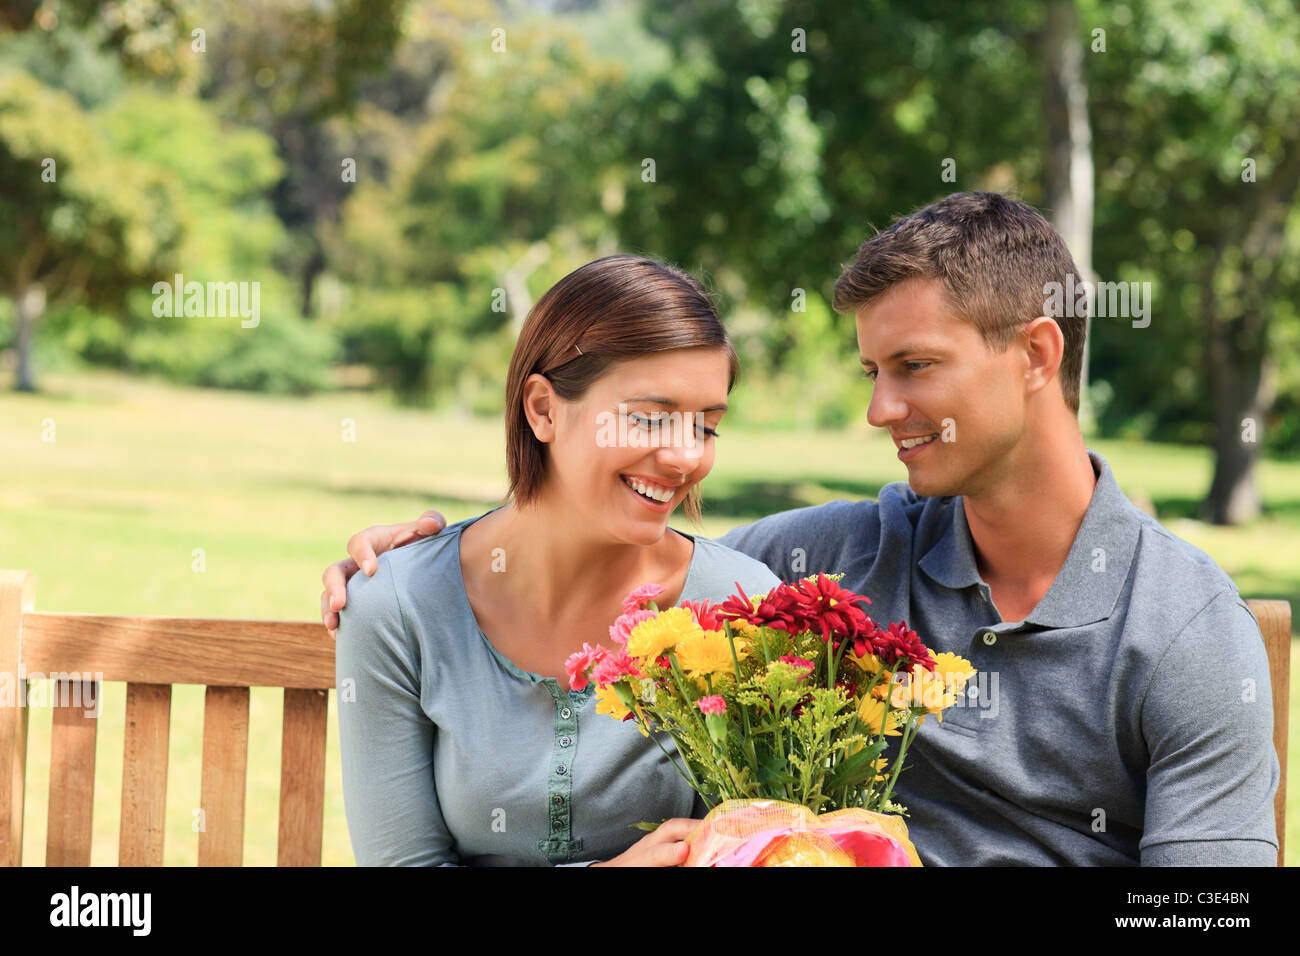 Man offering flowers to his girlfriend Stock Photo